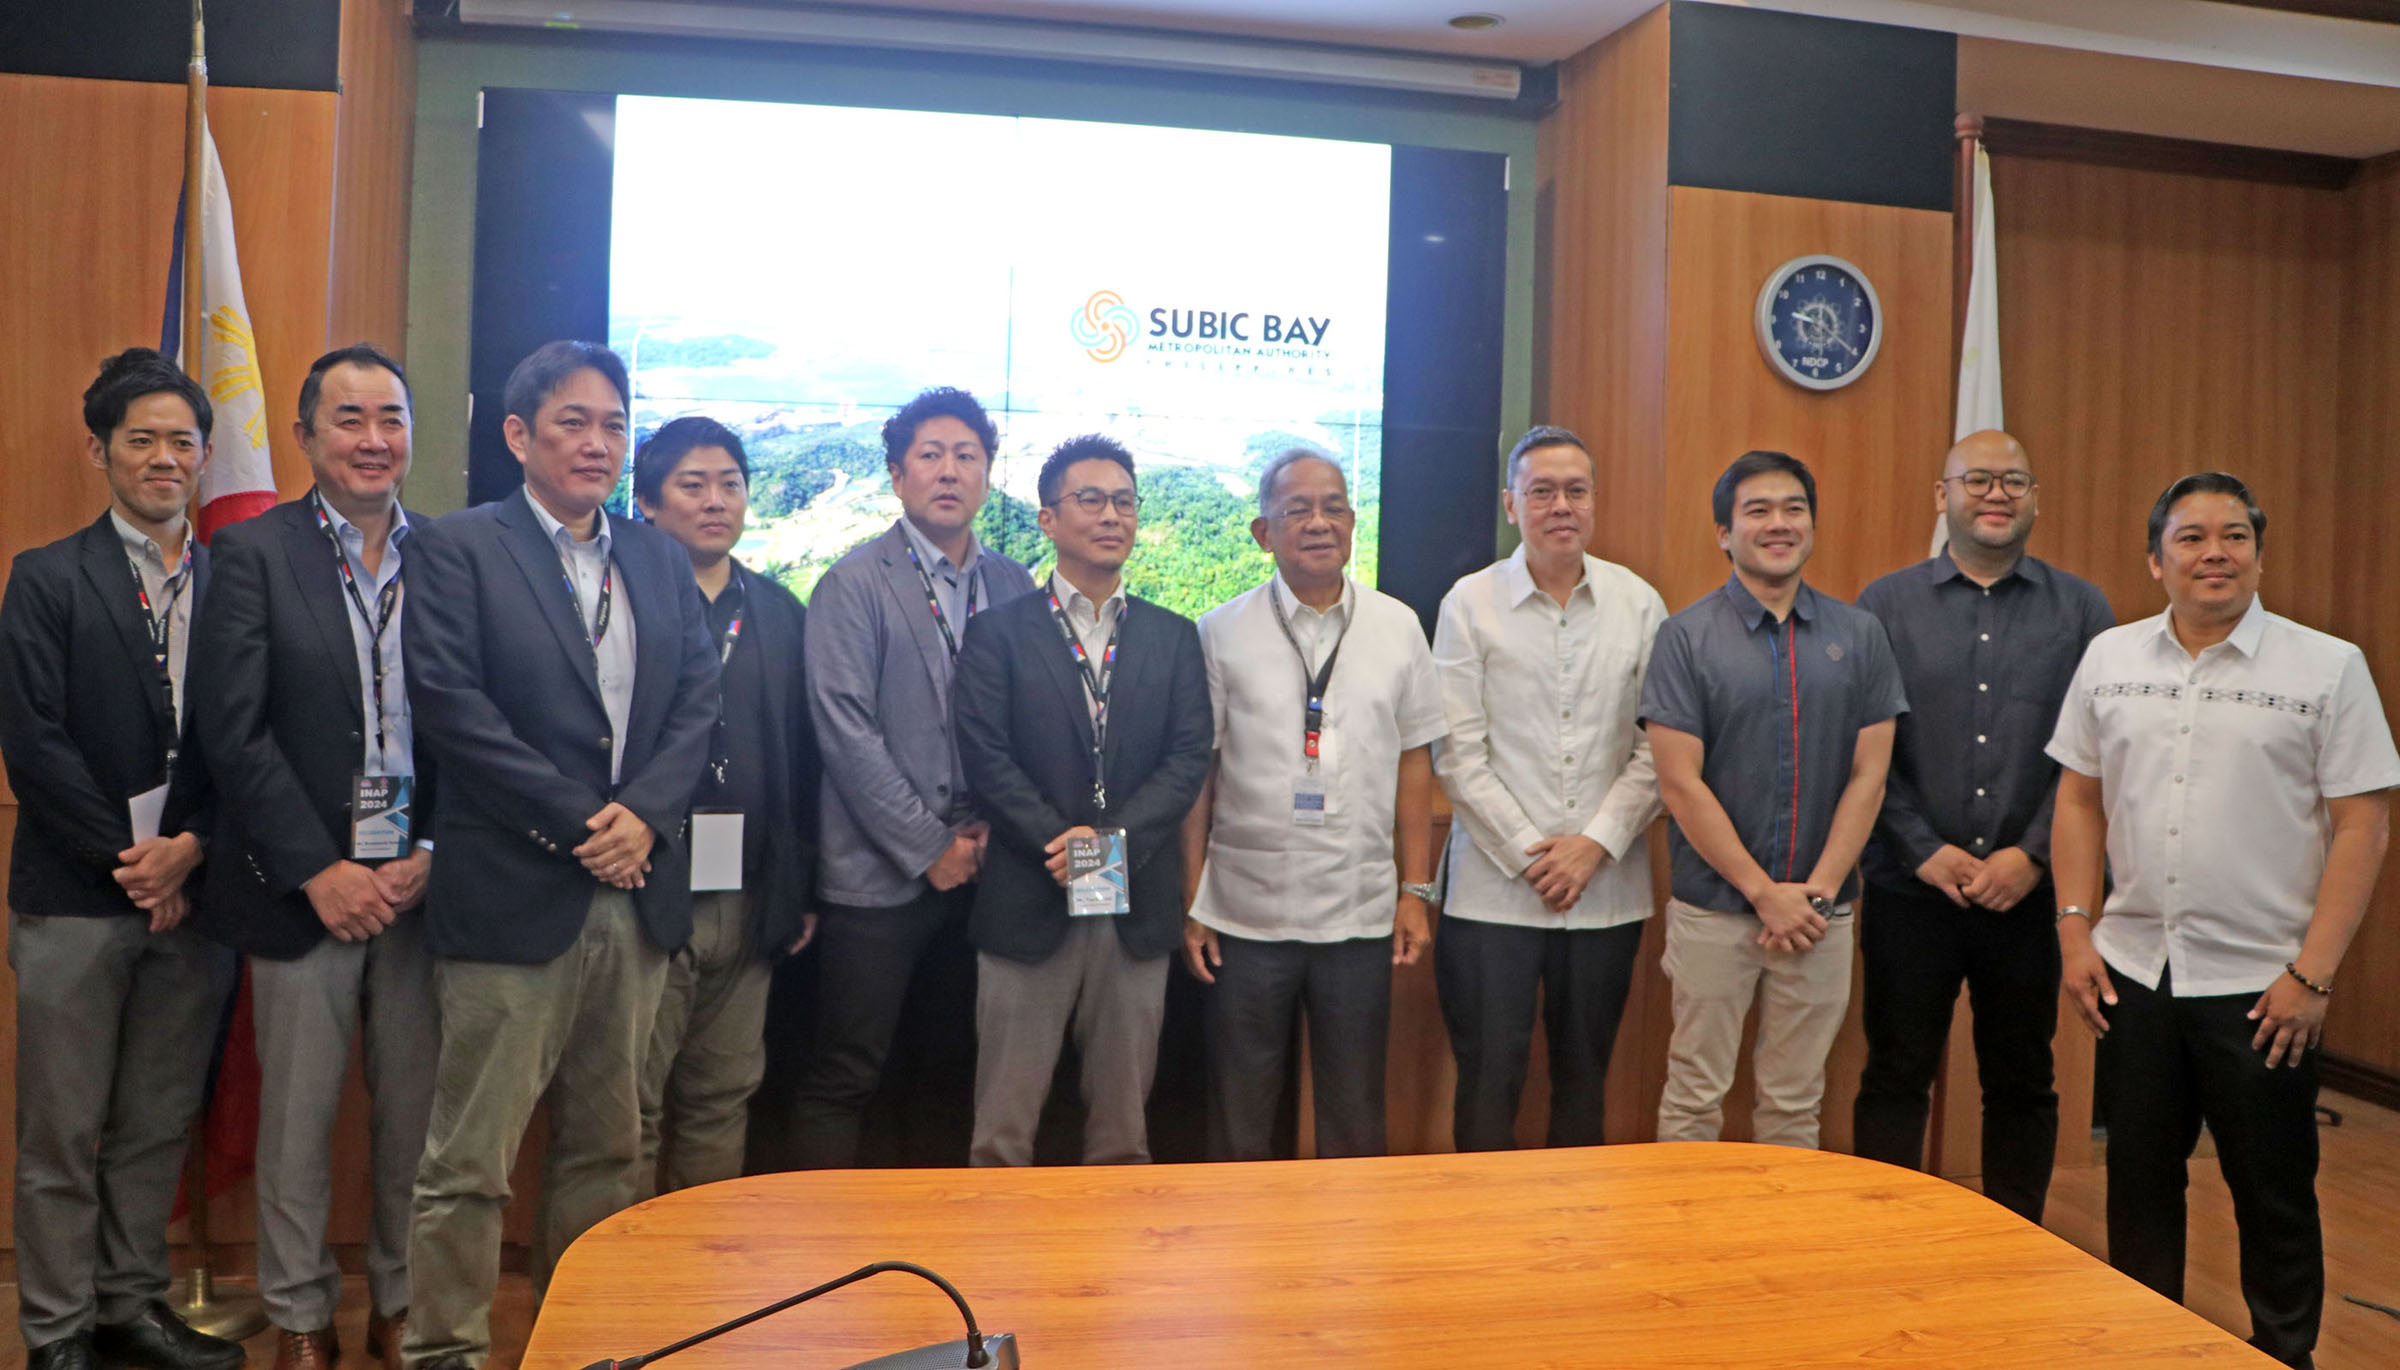 Subic Bay Metropolitan Authority (SBMA) Chairman and Administrator Eduardo Jose L. Aliño (left) meets with members of the International Network of Affiliated Ports (INAP) Secretariat led by Takanori Asai to discuss Port of Subic’s hosting of INAP General Assembly and Symposium slated on October this year. Member ports namely, the Port of Kochi, Port of Colombo, Mokpo New Port and Port of Dangjin, Port of Tanjung Perak, Port of Qingdao, and the Port of Subic, Port of Cebu, and Port of Davao in the Philippines are expected to join the said conference which will tackle environmental protection, disaster preparedness and other maritime related initiatives concerning member ports.